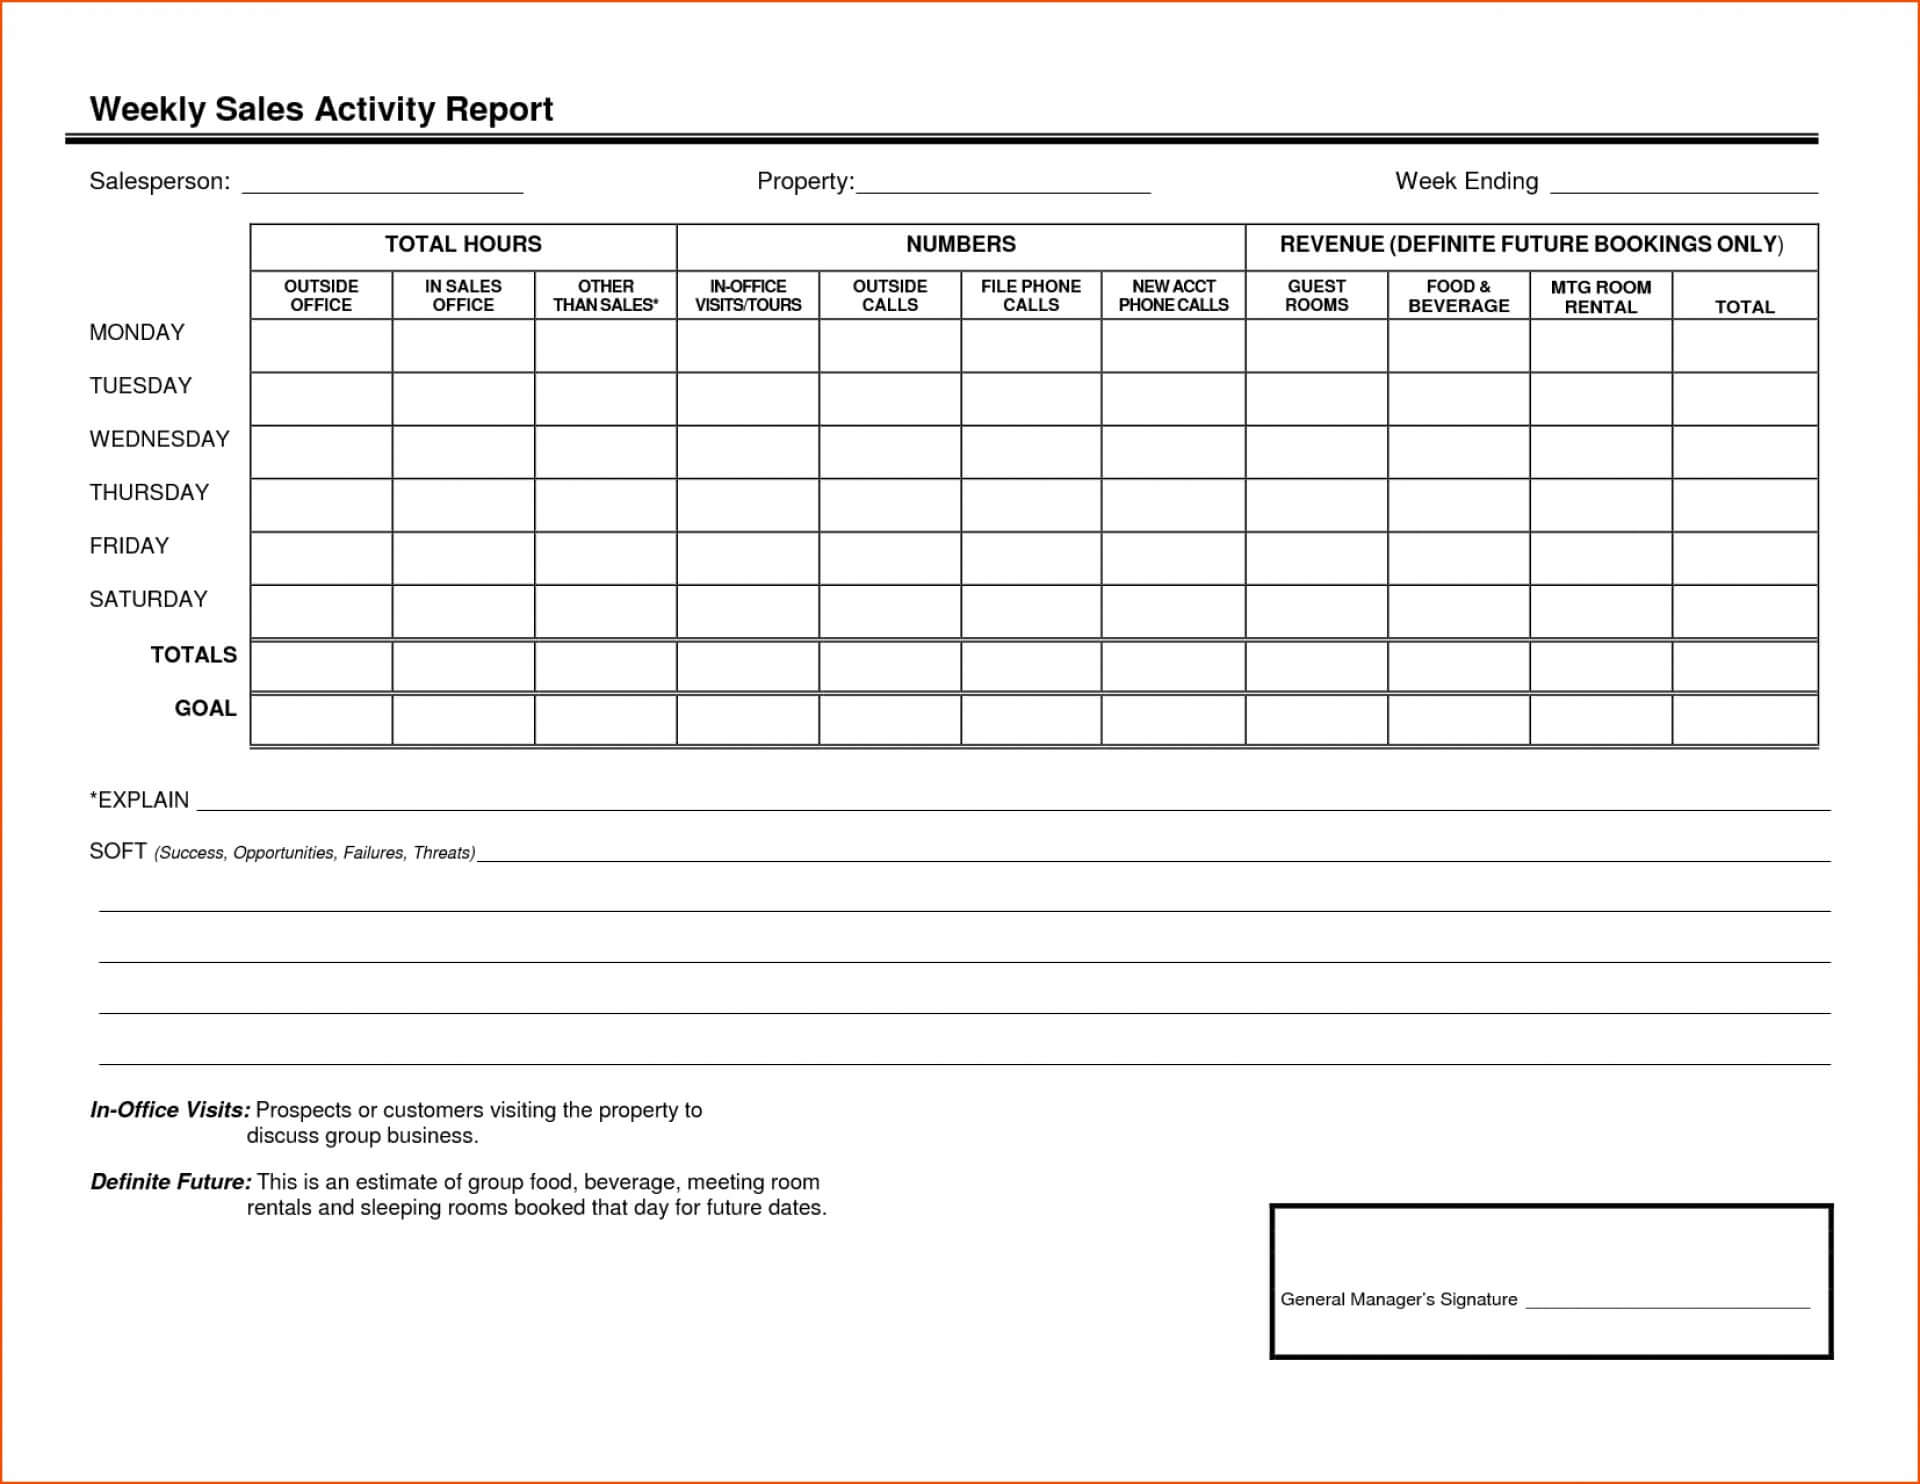 006 Weekly Sales Report Template Ideas Awesome Calls Free Pertaining To Daily Sales Report Template Excel Free